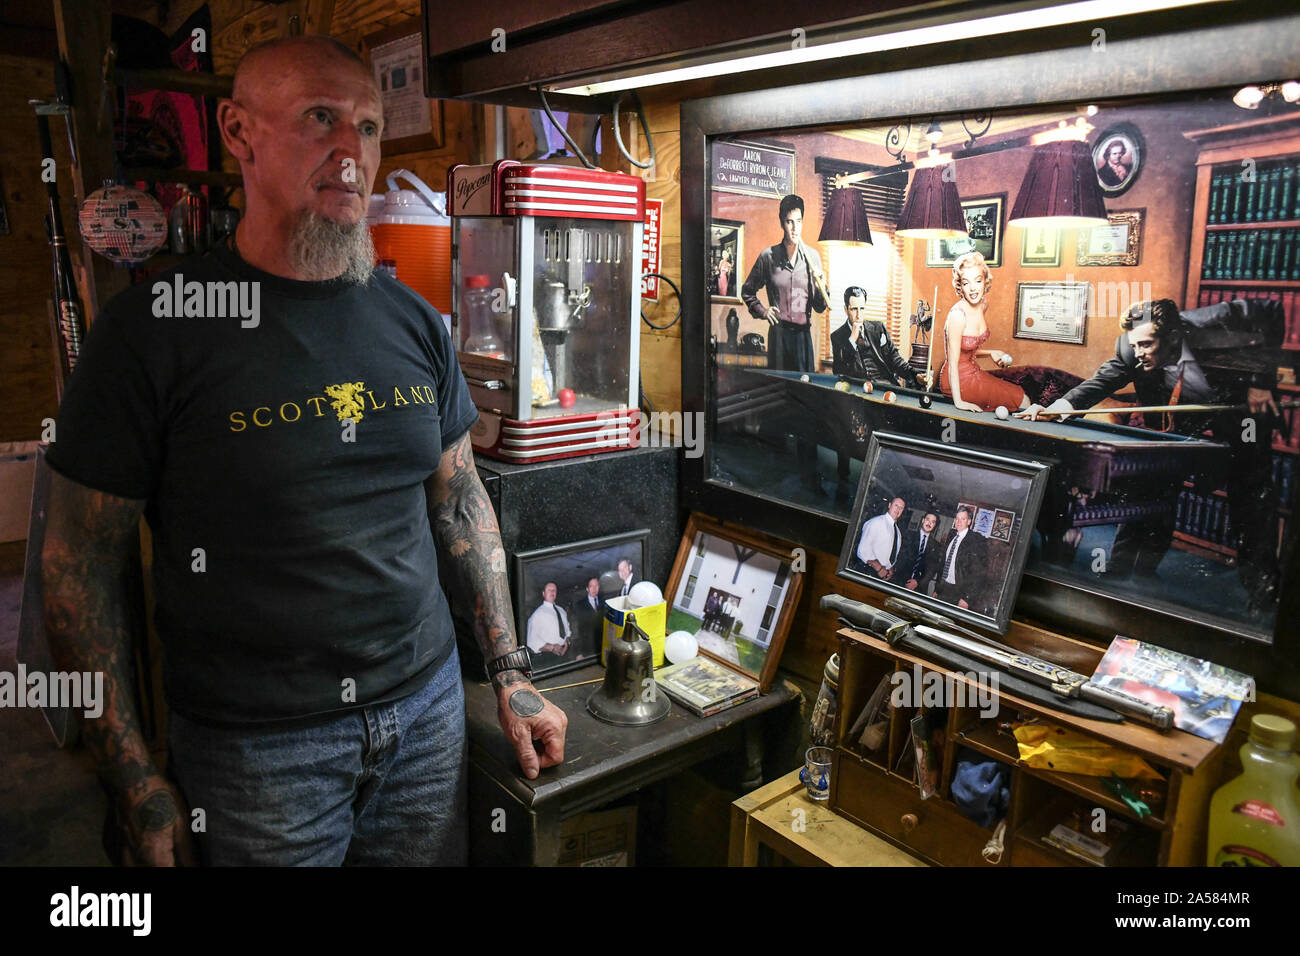 Dahlonega, Georgia, USA. 16th Sep, 2019. Doles in front of his collection of 'Americana,'' including white movie stars, a sword, and two identical photos of him with David Duke, whom Doles points to as evidence of his own mainstream American values. Credit: Miguel Juarez Lugo/ZUMA Wire/Alamy Live News Stock Photo